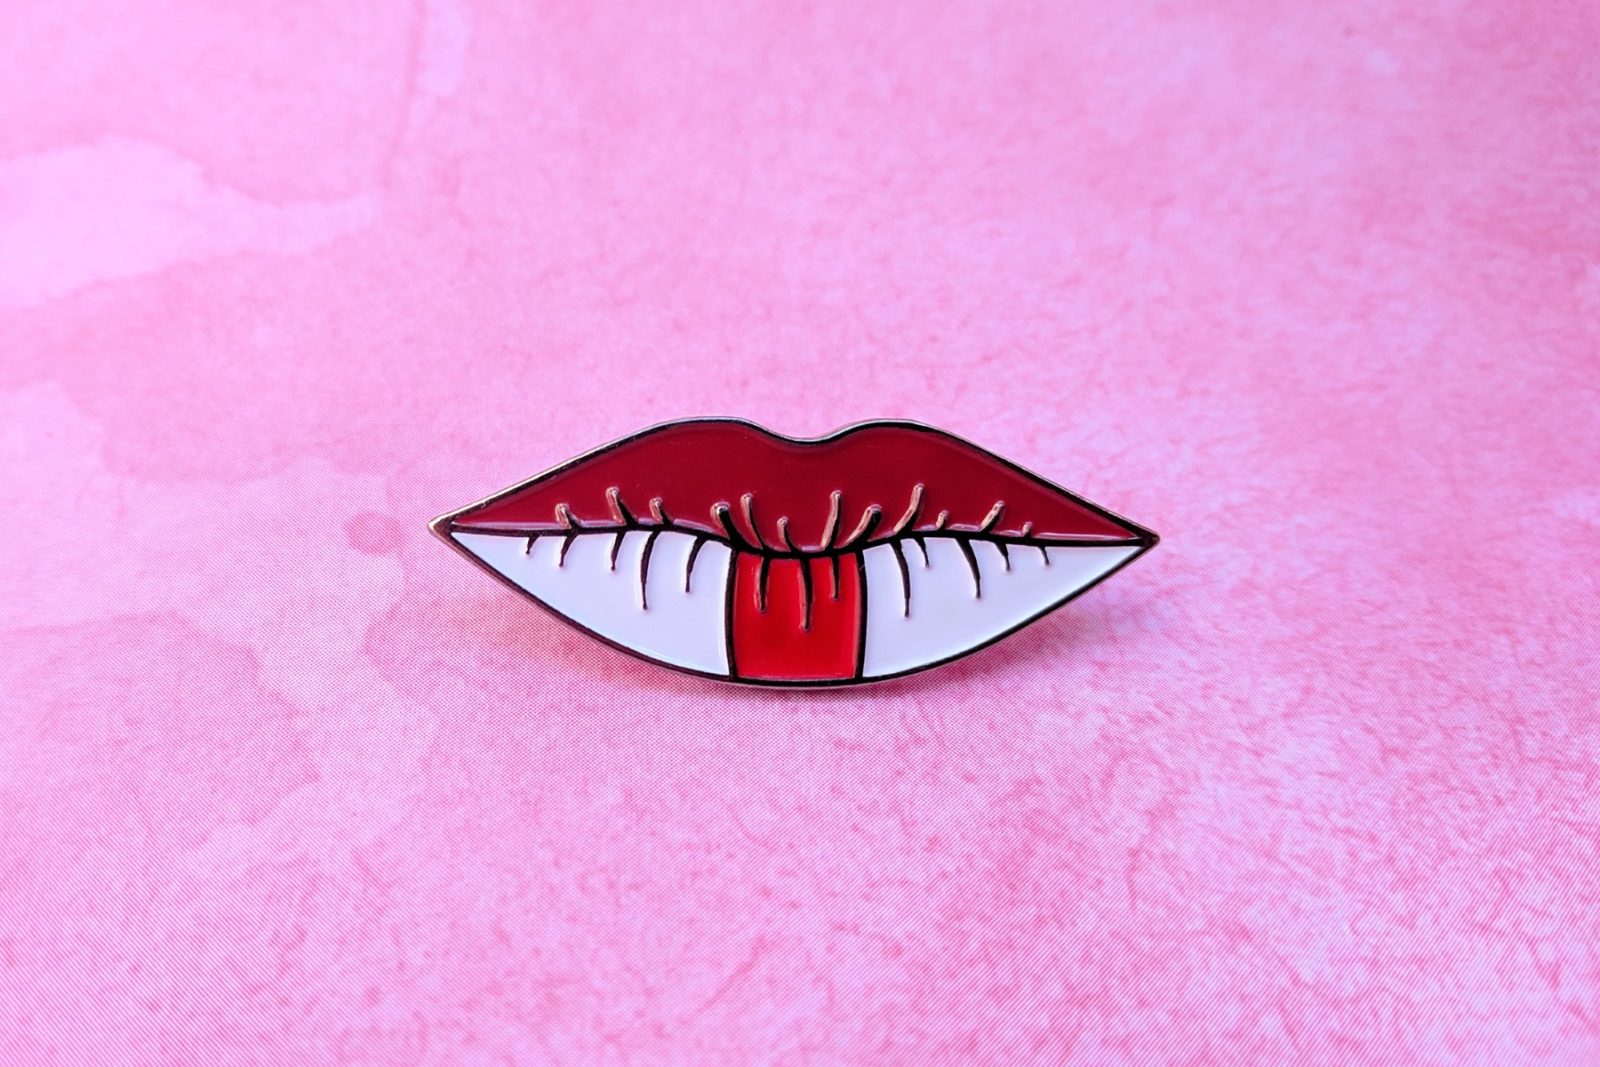 Star Wars Queen Amidala Inspired Scar of Remembrance Enamel Pin by Etsy seller Fulcrum Dawn